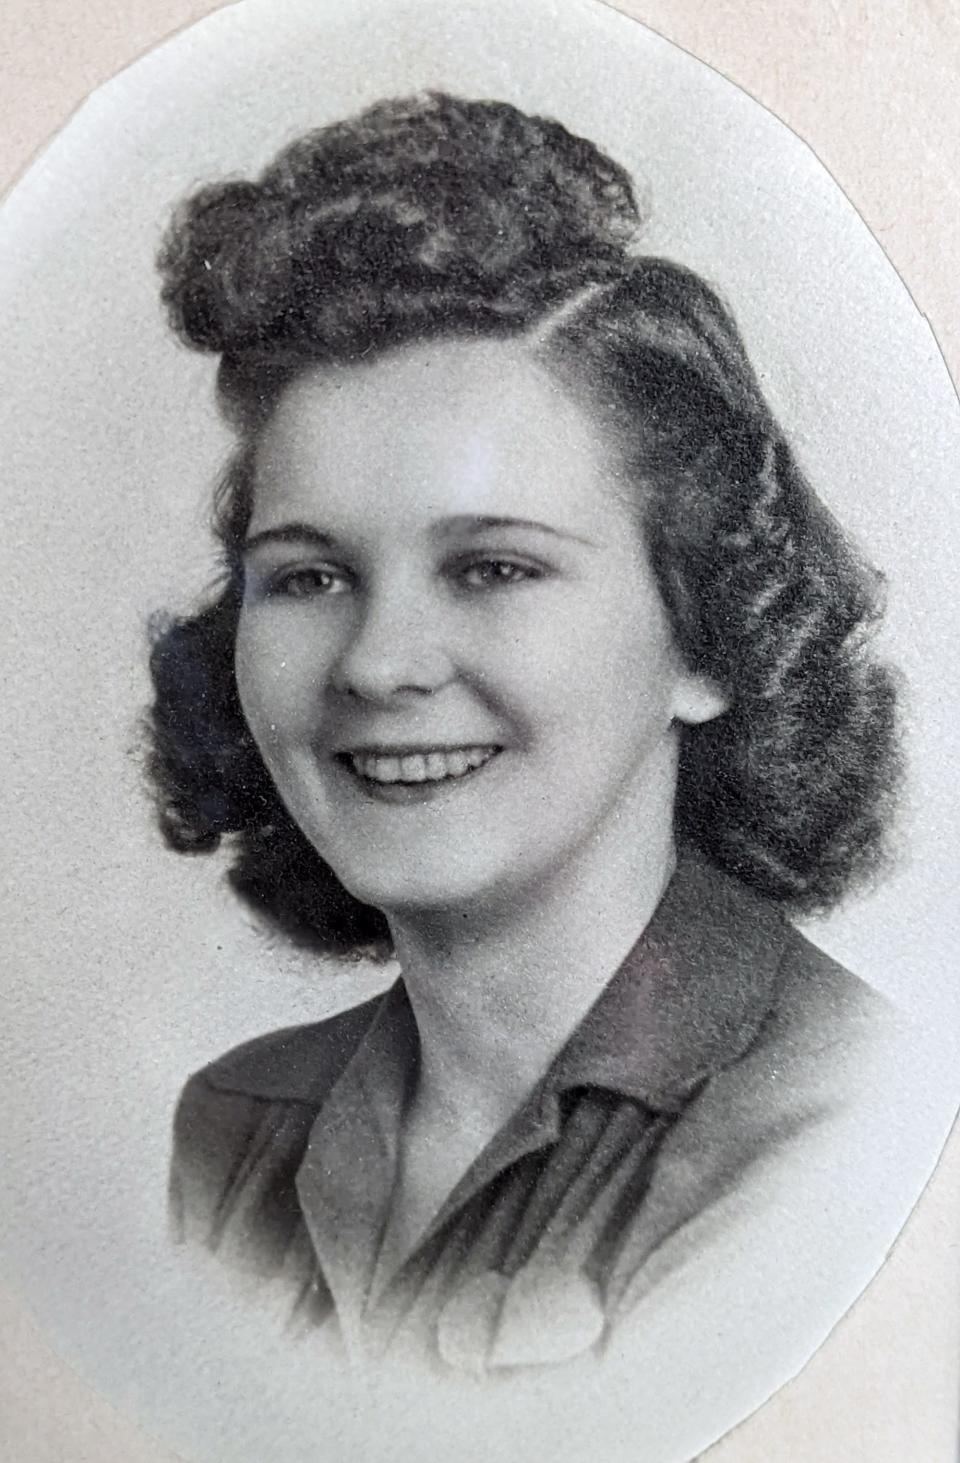 This is Leroy Krebs' first wife, Mildred, who he met at the Glen Rock Drugstore. He was also first asked to work as a teacher at the same drug store.